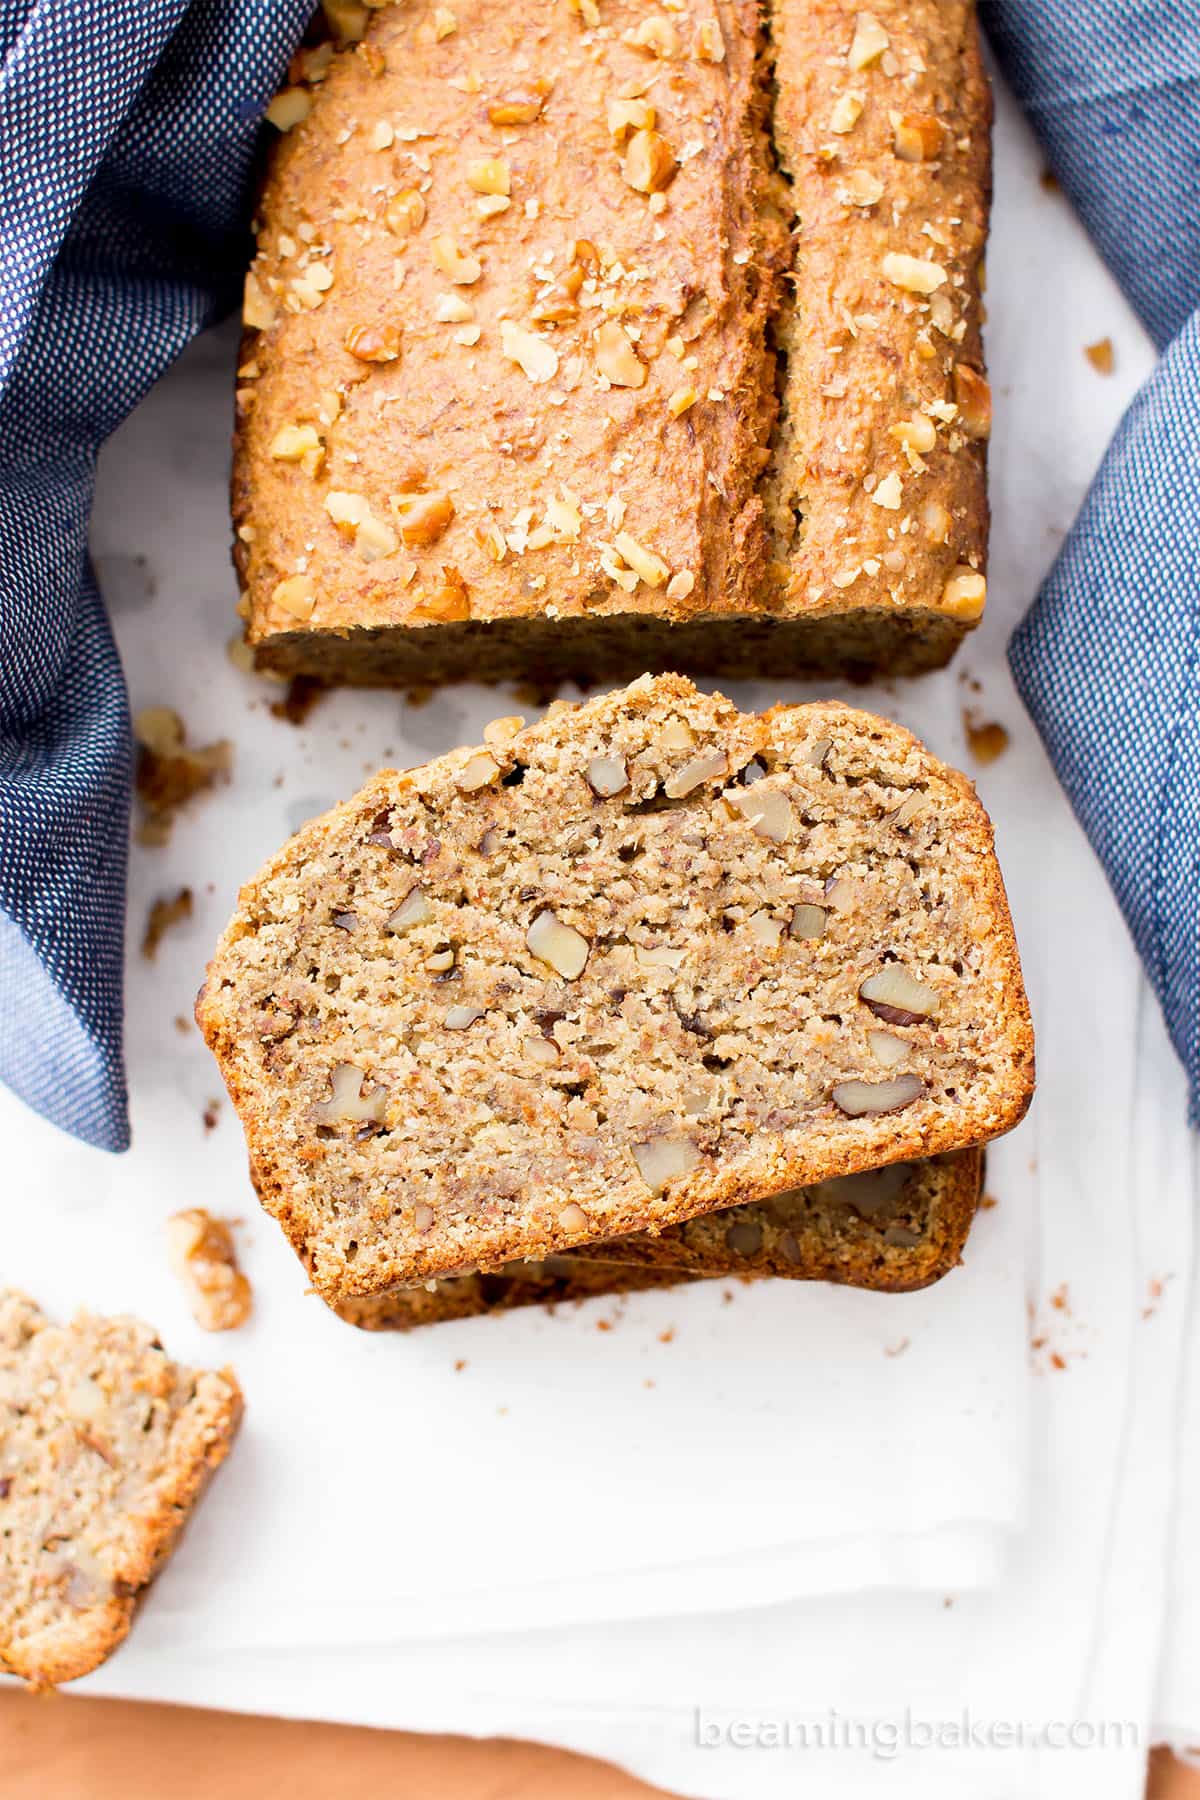 What is a simple recipe for banana nut bread?